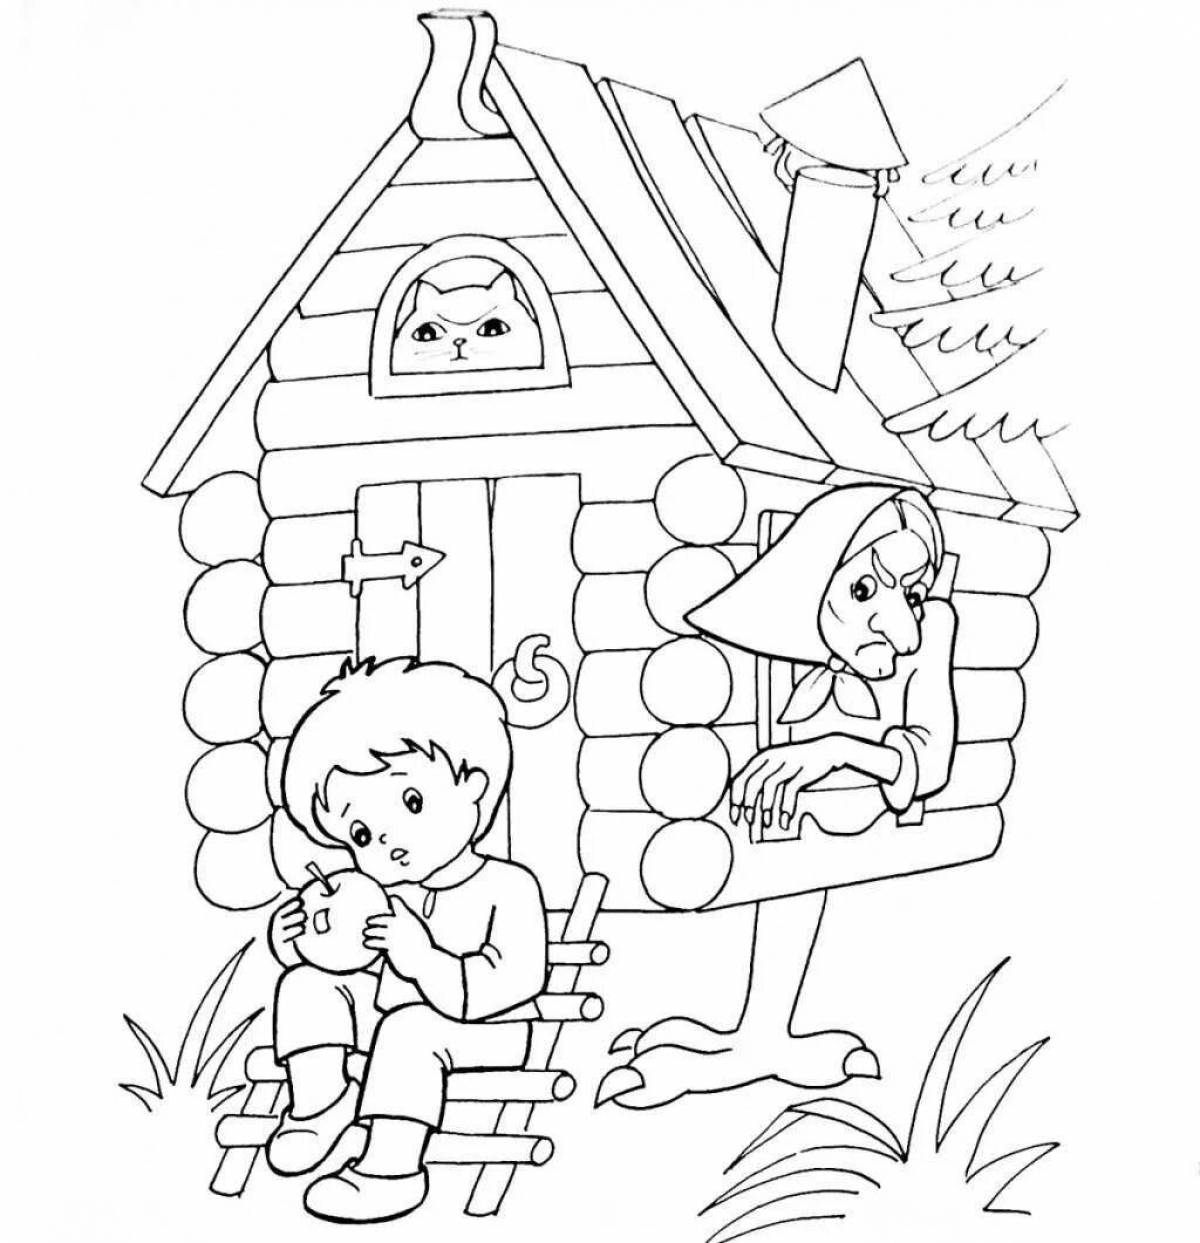 Playful swan geese coloring page for kids